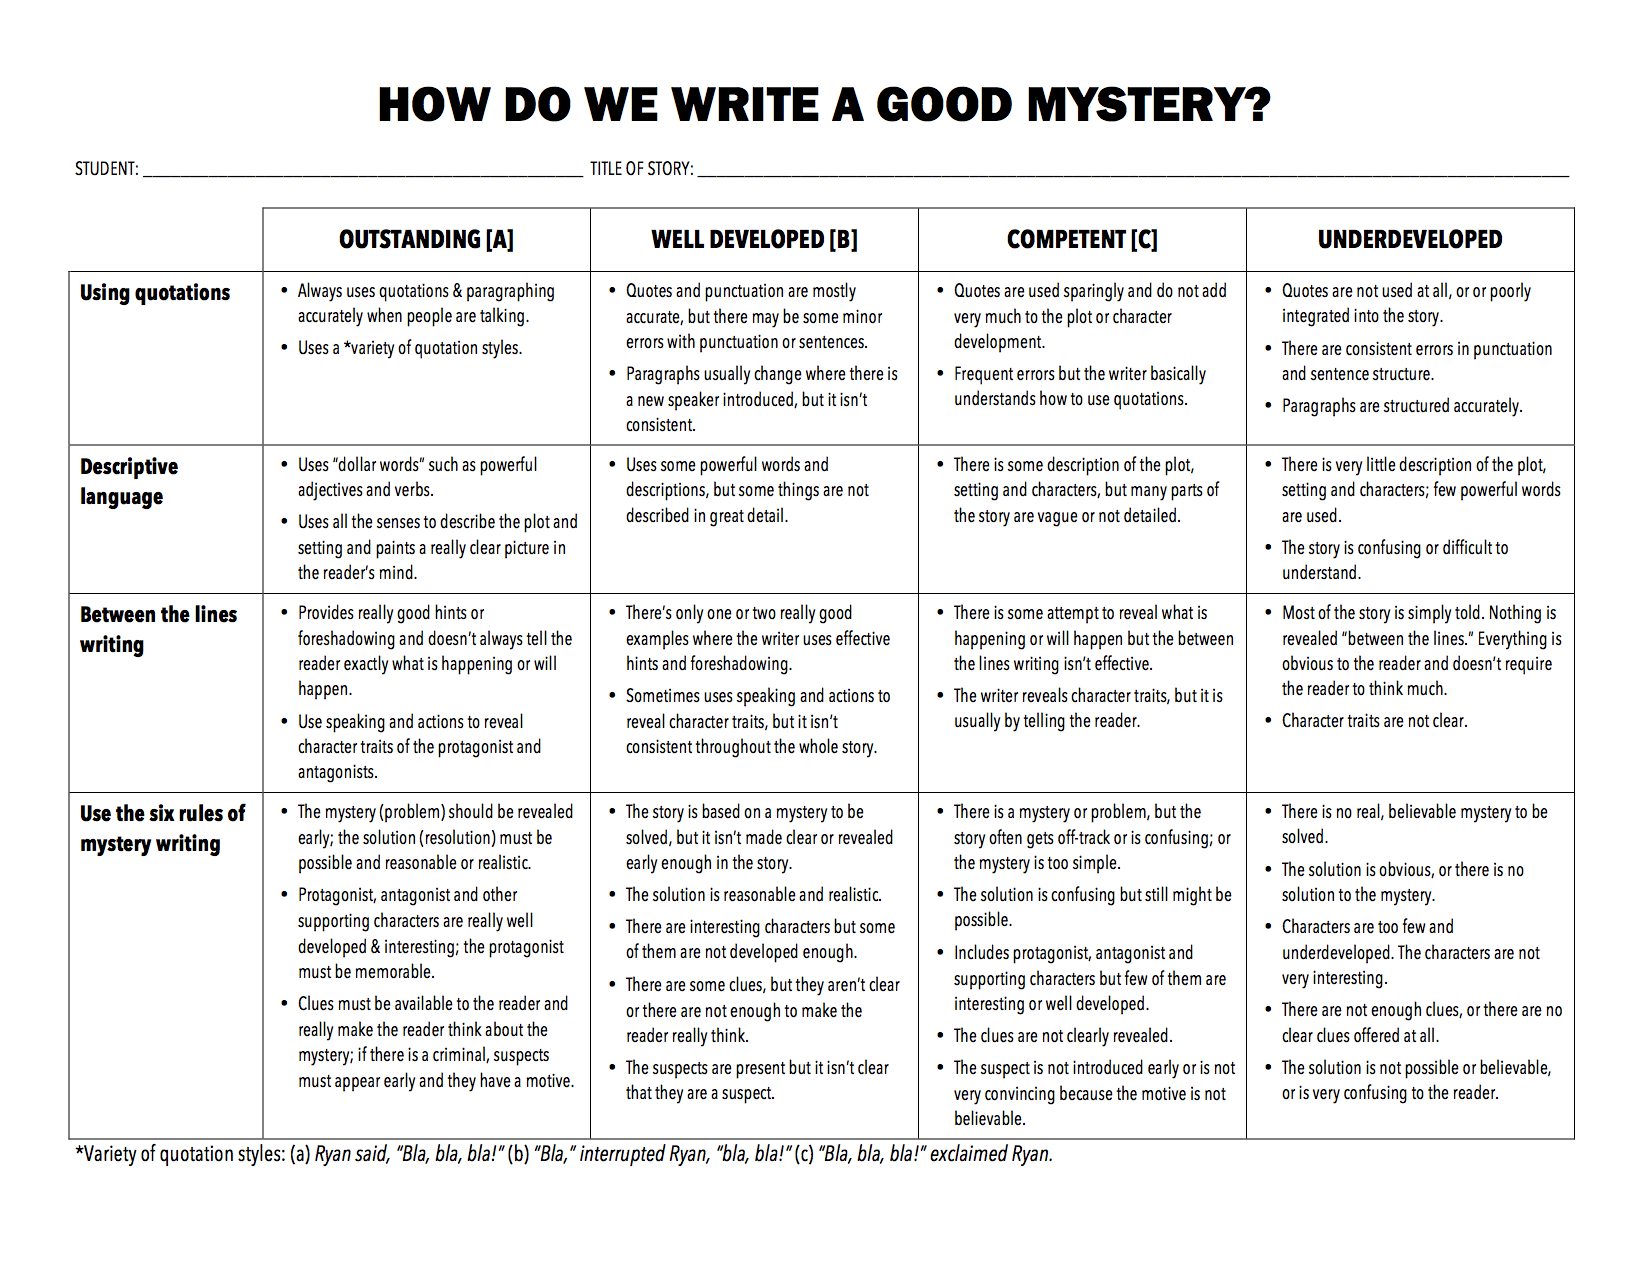 HOW DO WE WRITE A GOOD MYSTERY?  20learning